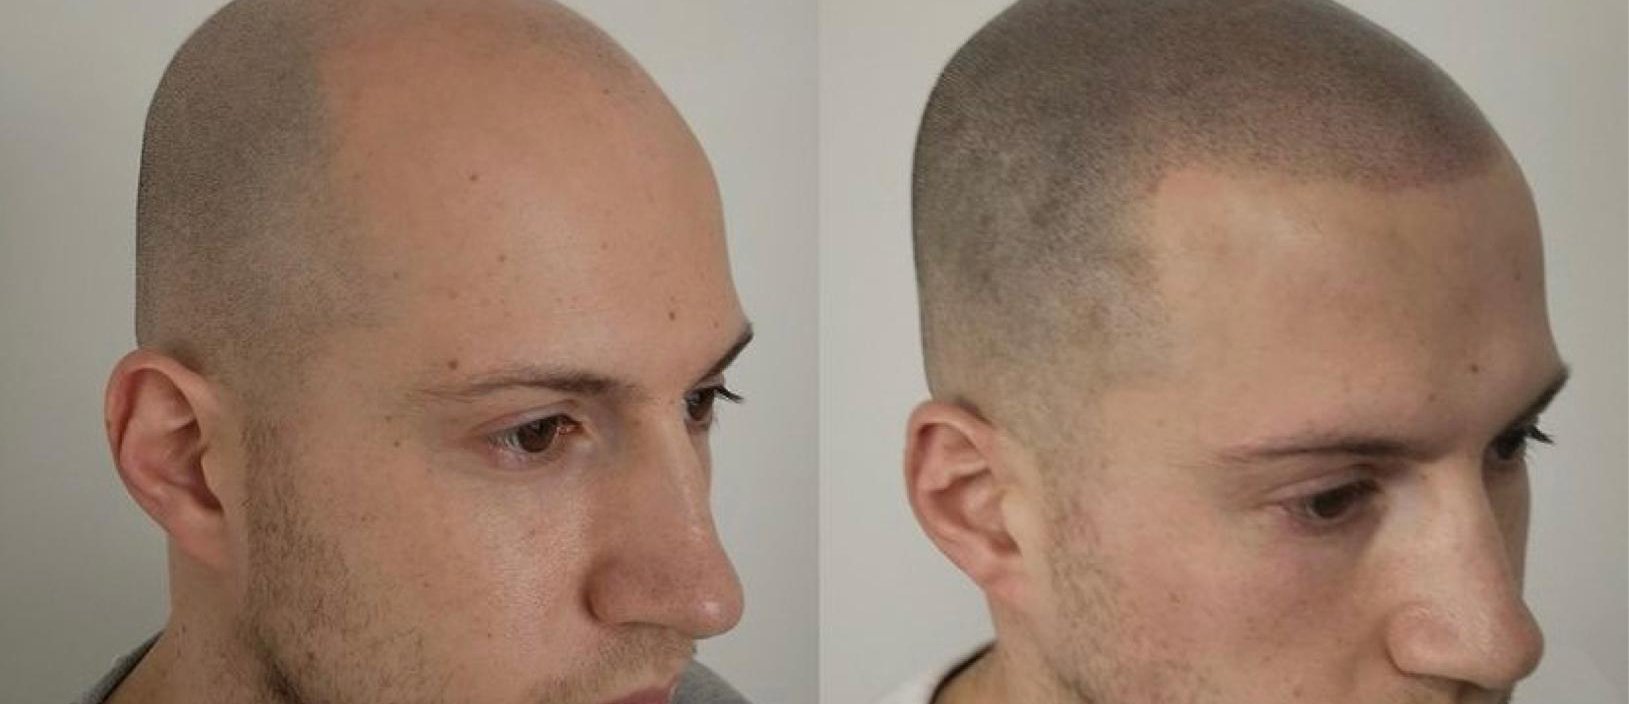 Before and after of an amazing procedure we did. We are the best in the art  of hair tattoo and scalp pigmentation. | Hair tattoos, Hairline tattoos, Scalp  tattoo